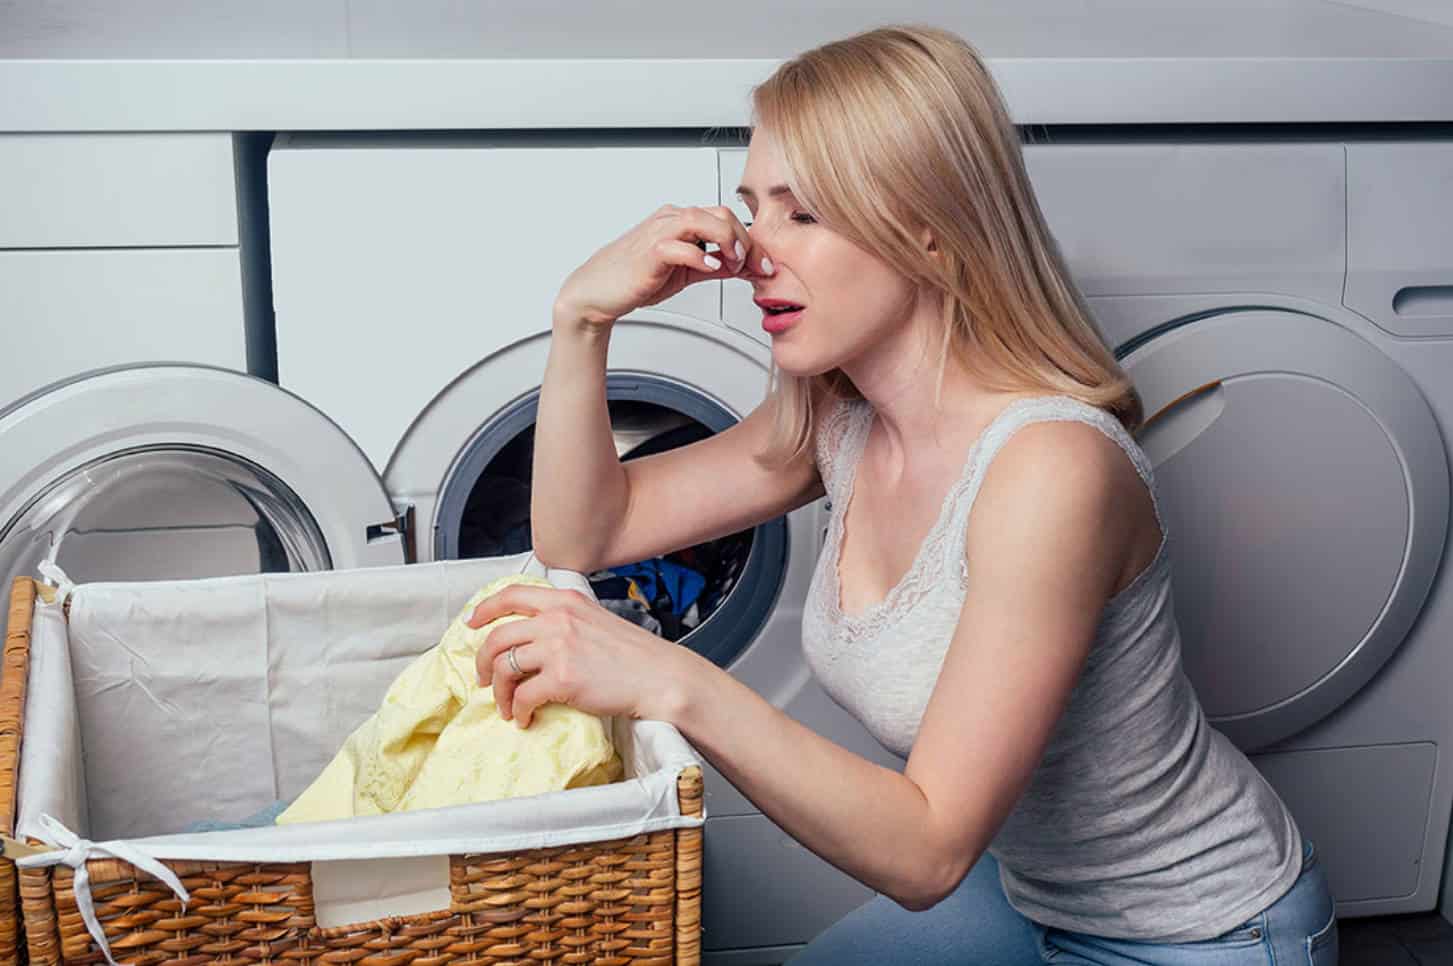 How to deal with mildew smells on clothes